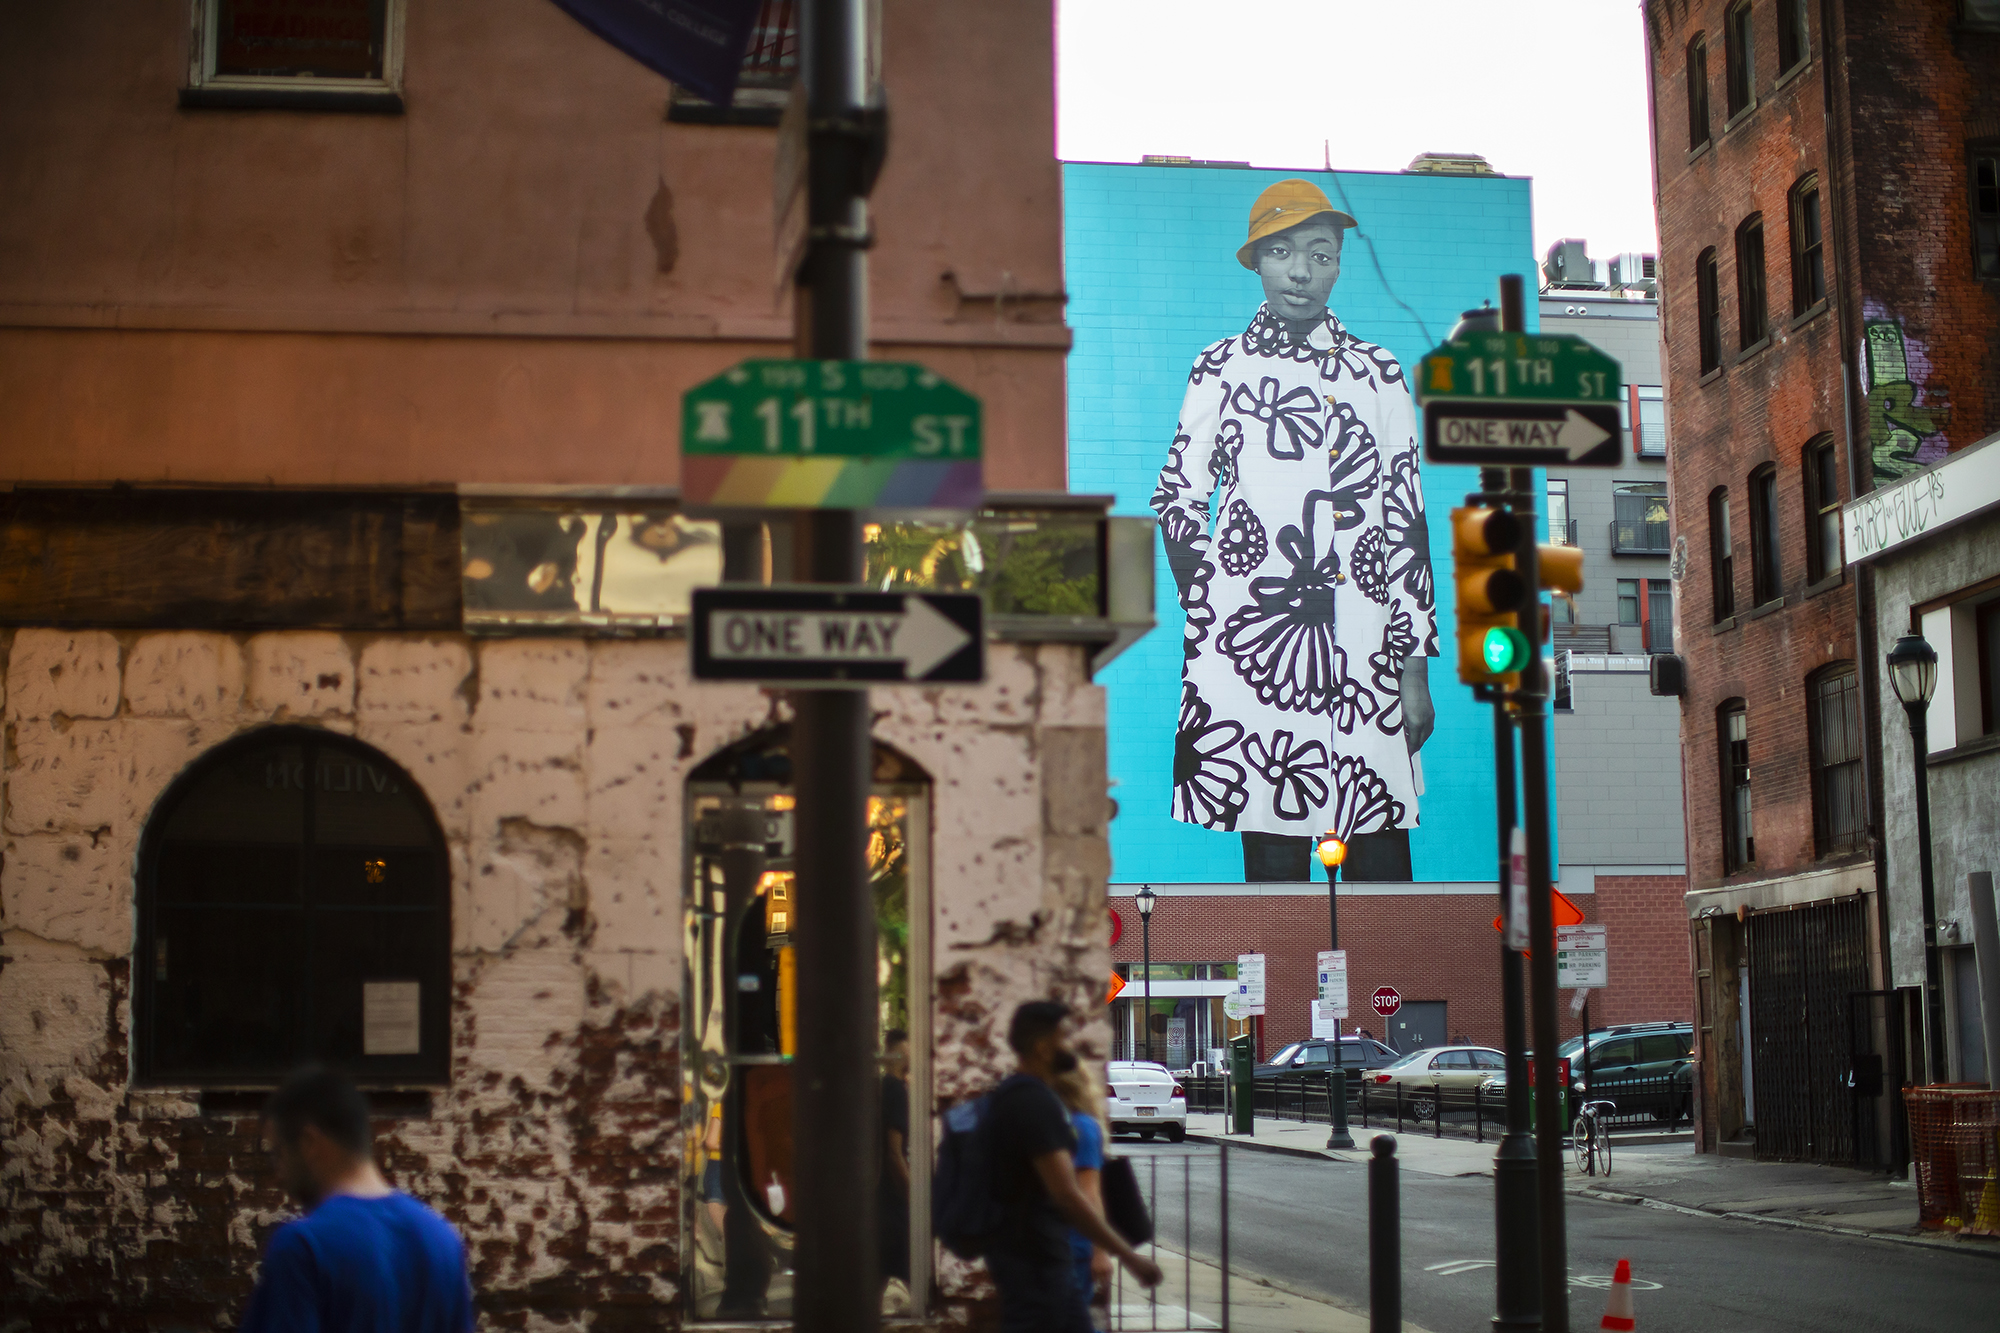 A mural featuring a young woman can be seen beyond brick buildings and a traffic light and signs including 11th street and one way.